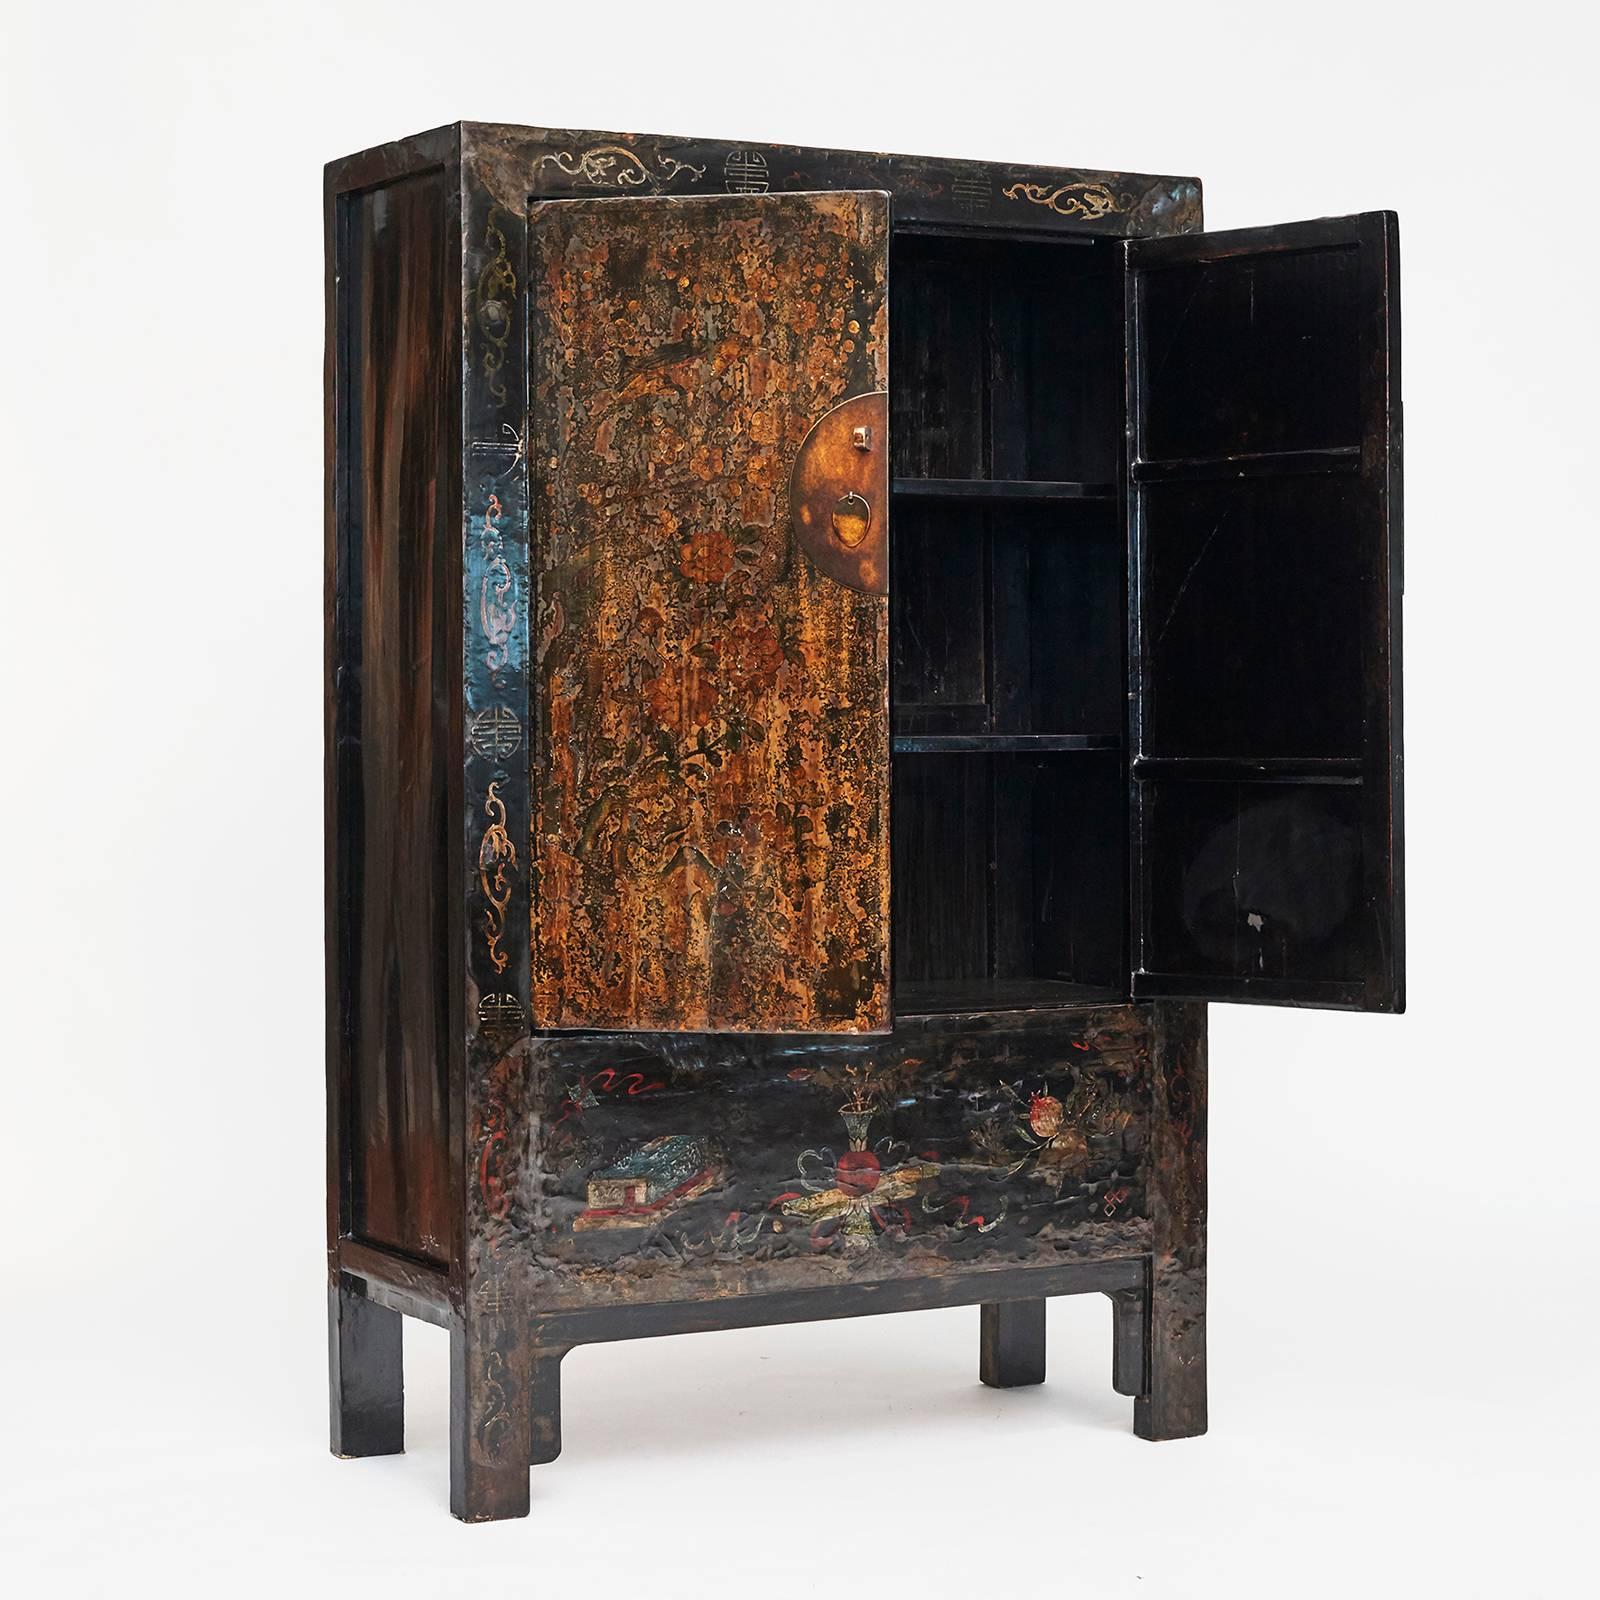 19th Century Original Decorated lacquer cabinet from 